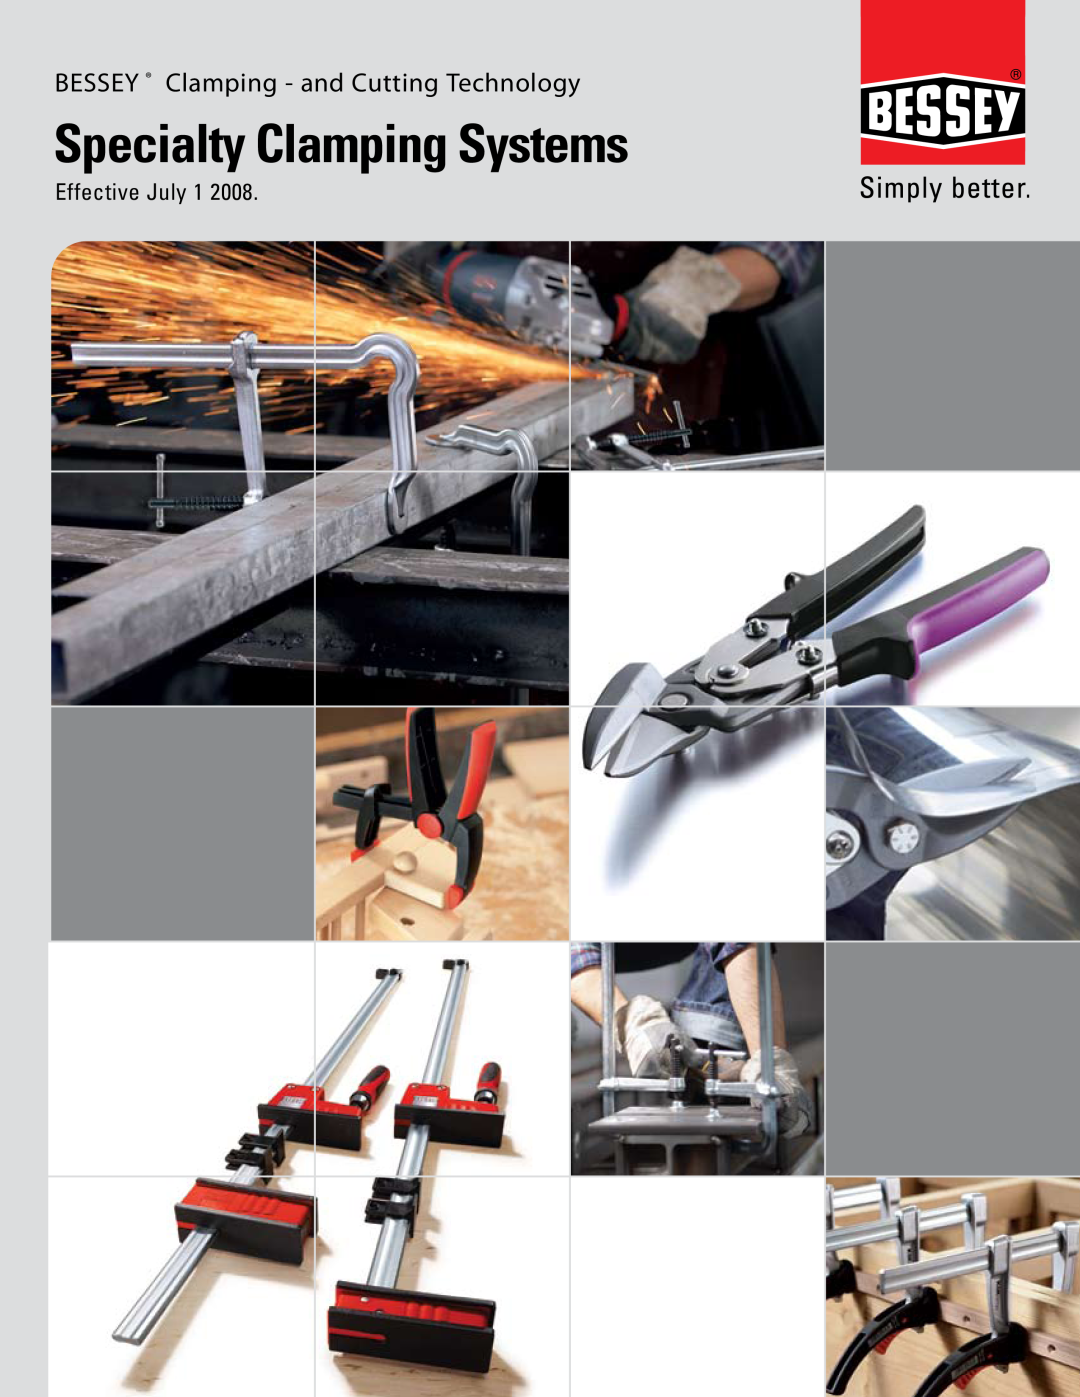 Bessey PS55 manual BESSEY Clamping - and Cutting Technology, Specialty Clamping Systems, Effective July 1 